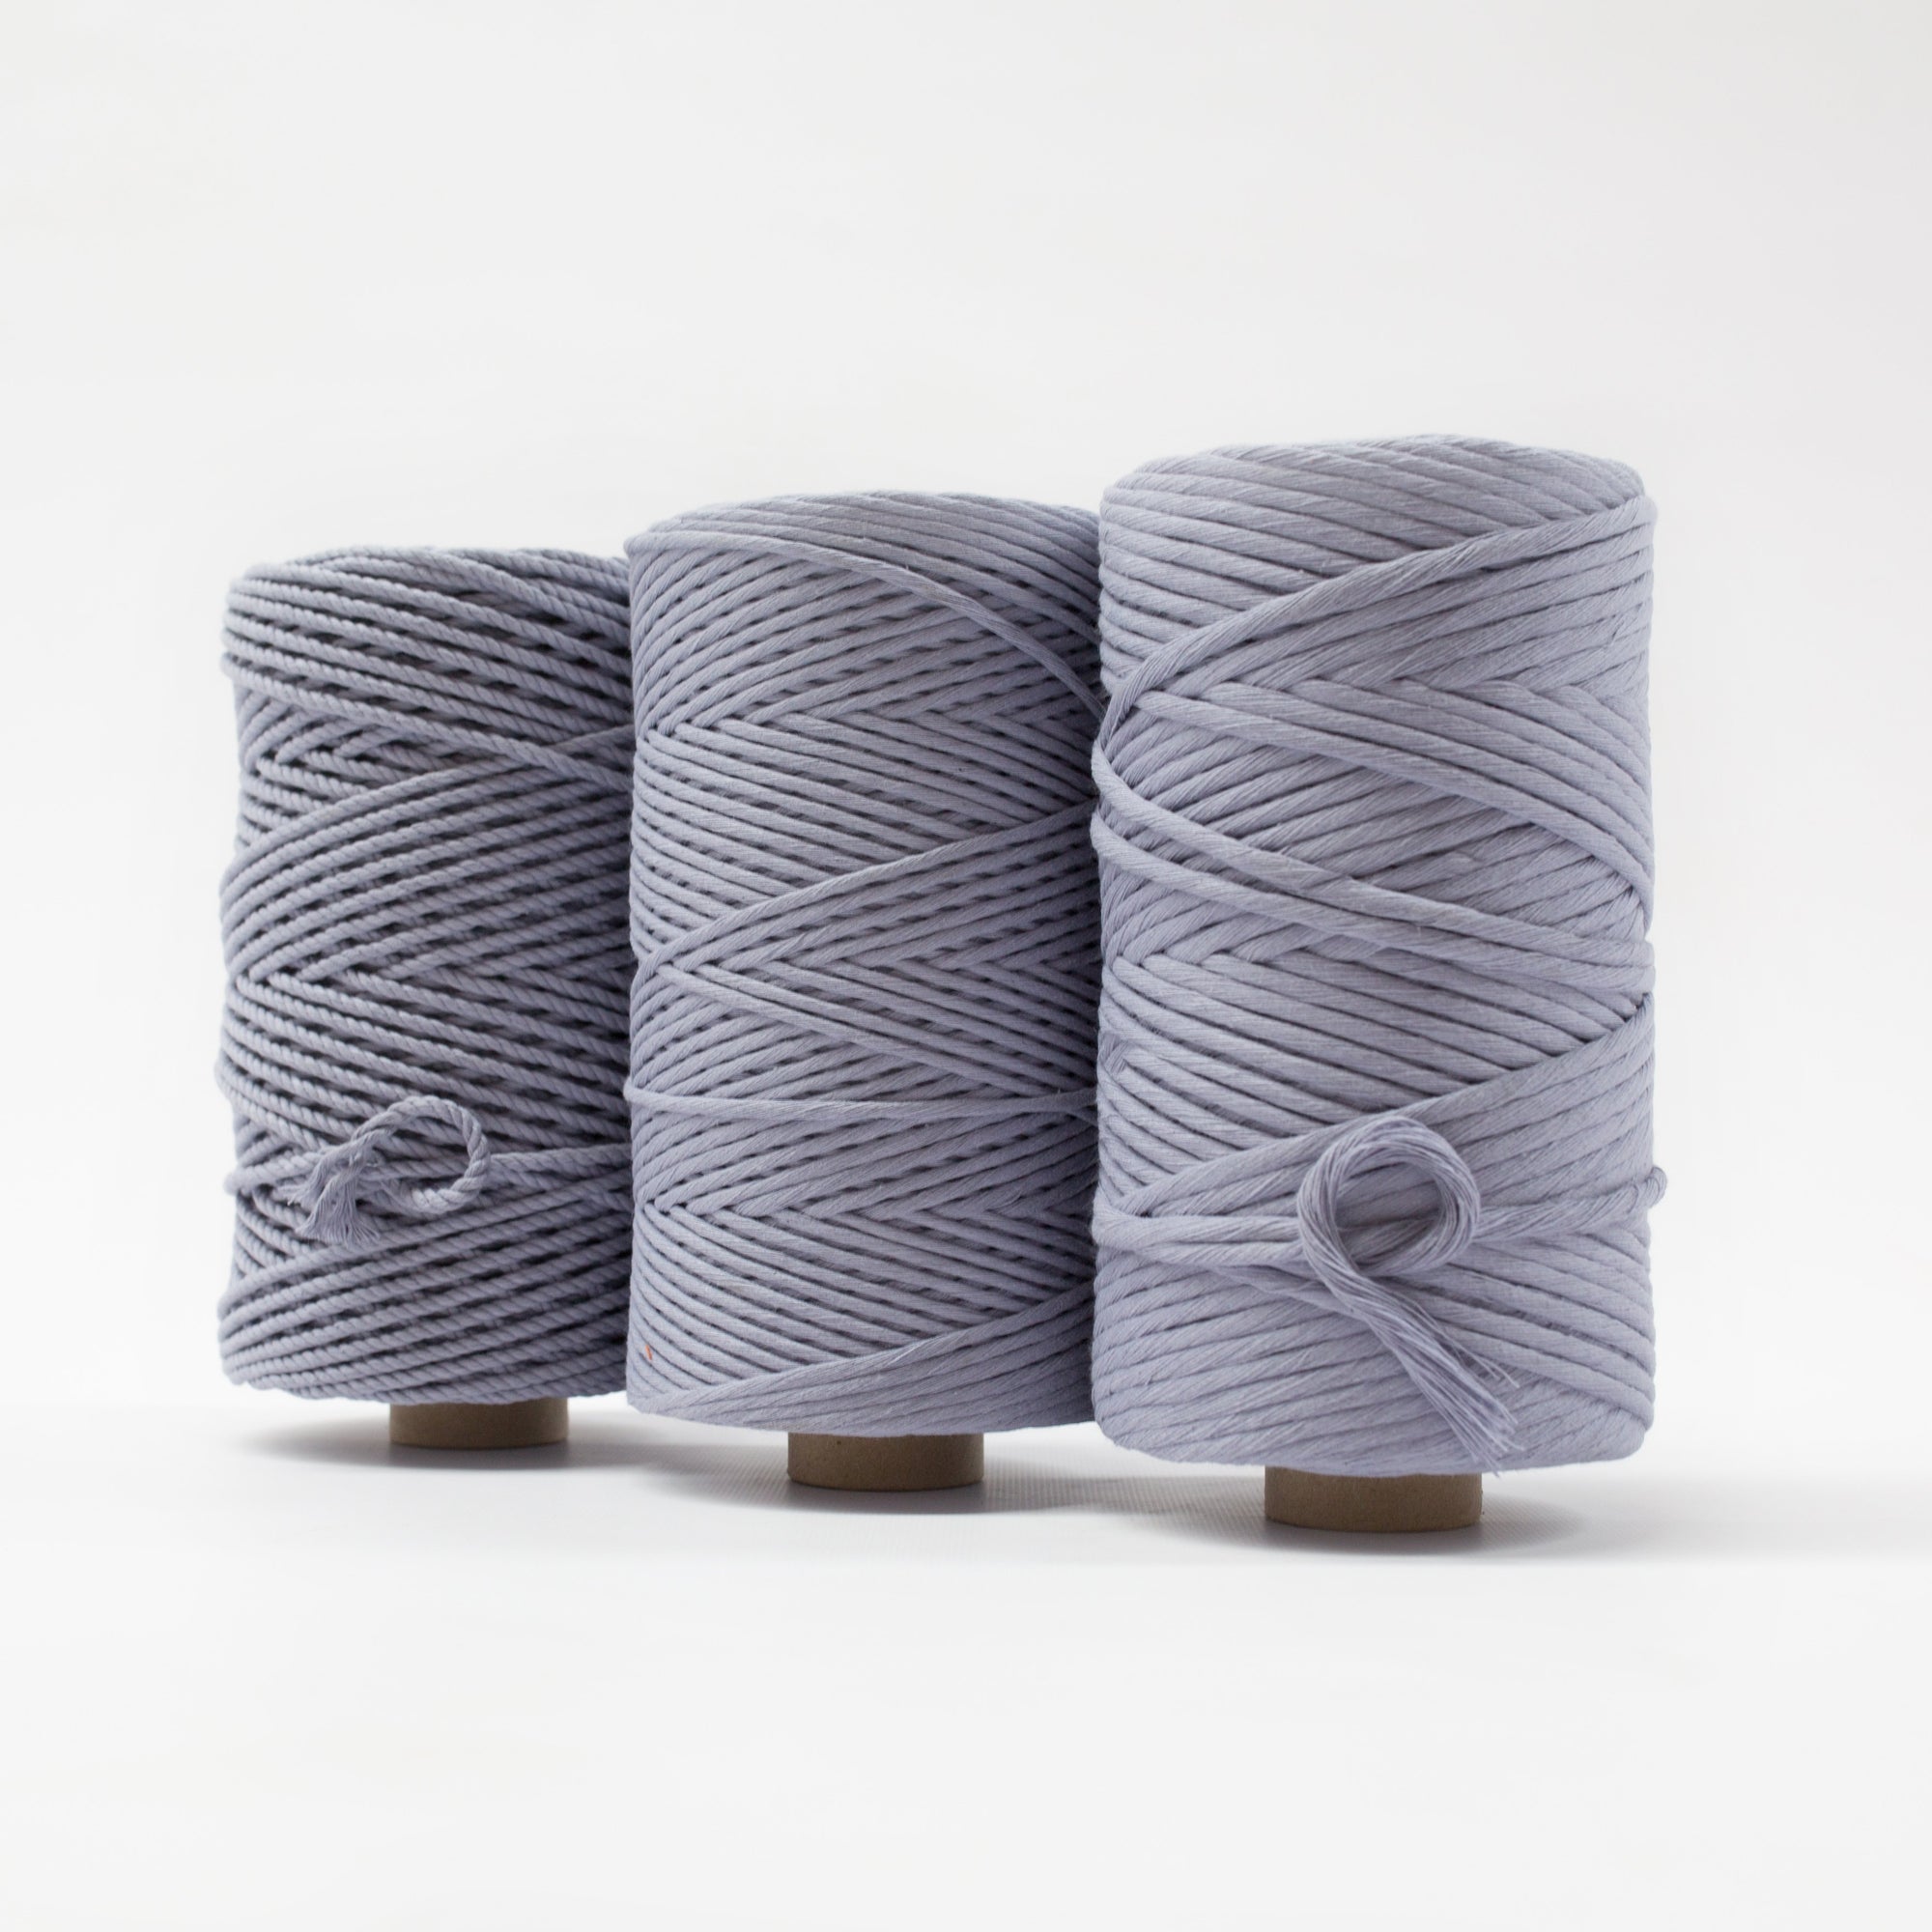 Mary Maker Studio Luxe Colour Cotton 4mm 1KG Recycled Luxe Macrame Rope // Periwinkle macrame cotton macrame rope macrame workshop macrame patterns macrame